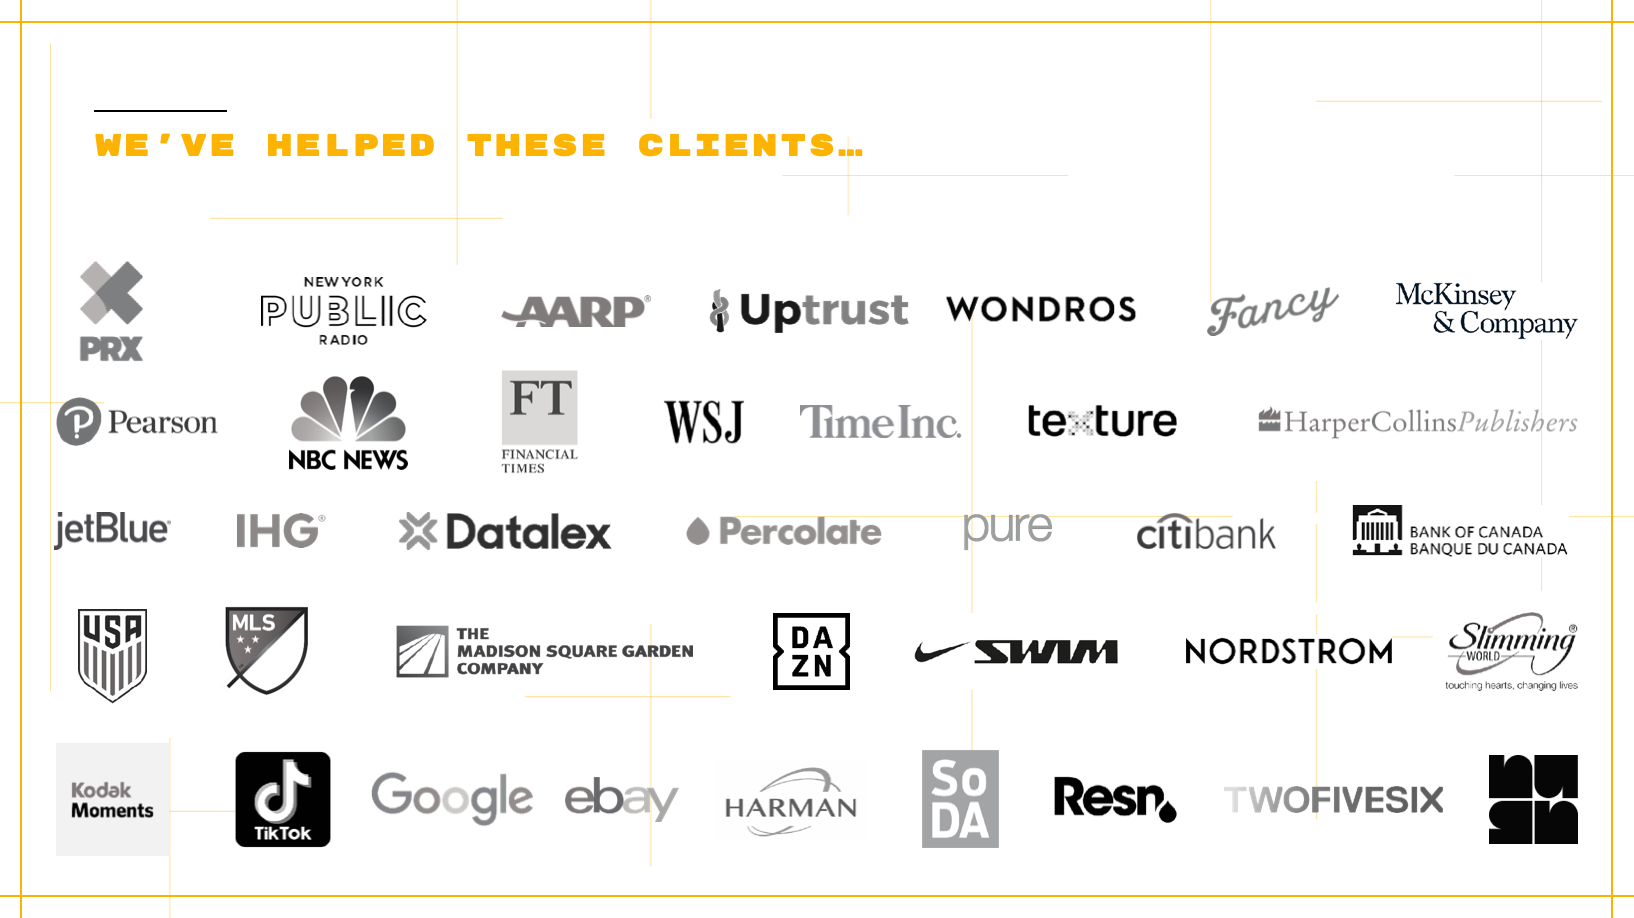 List of clients